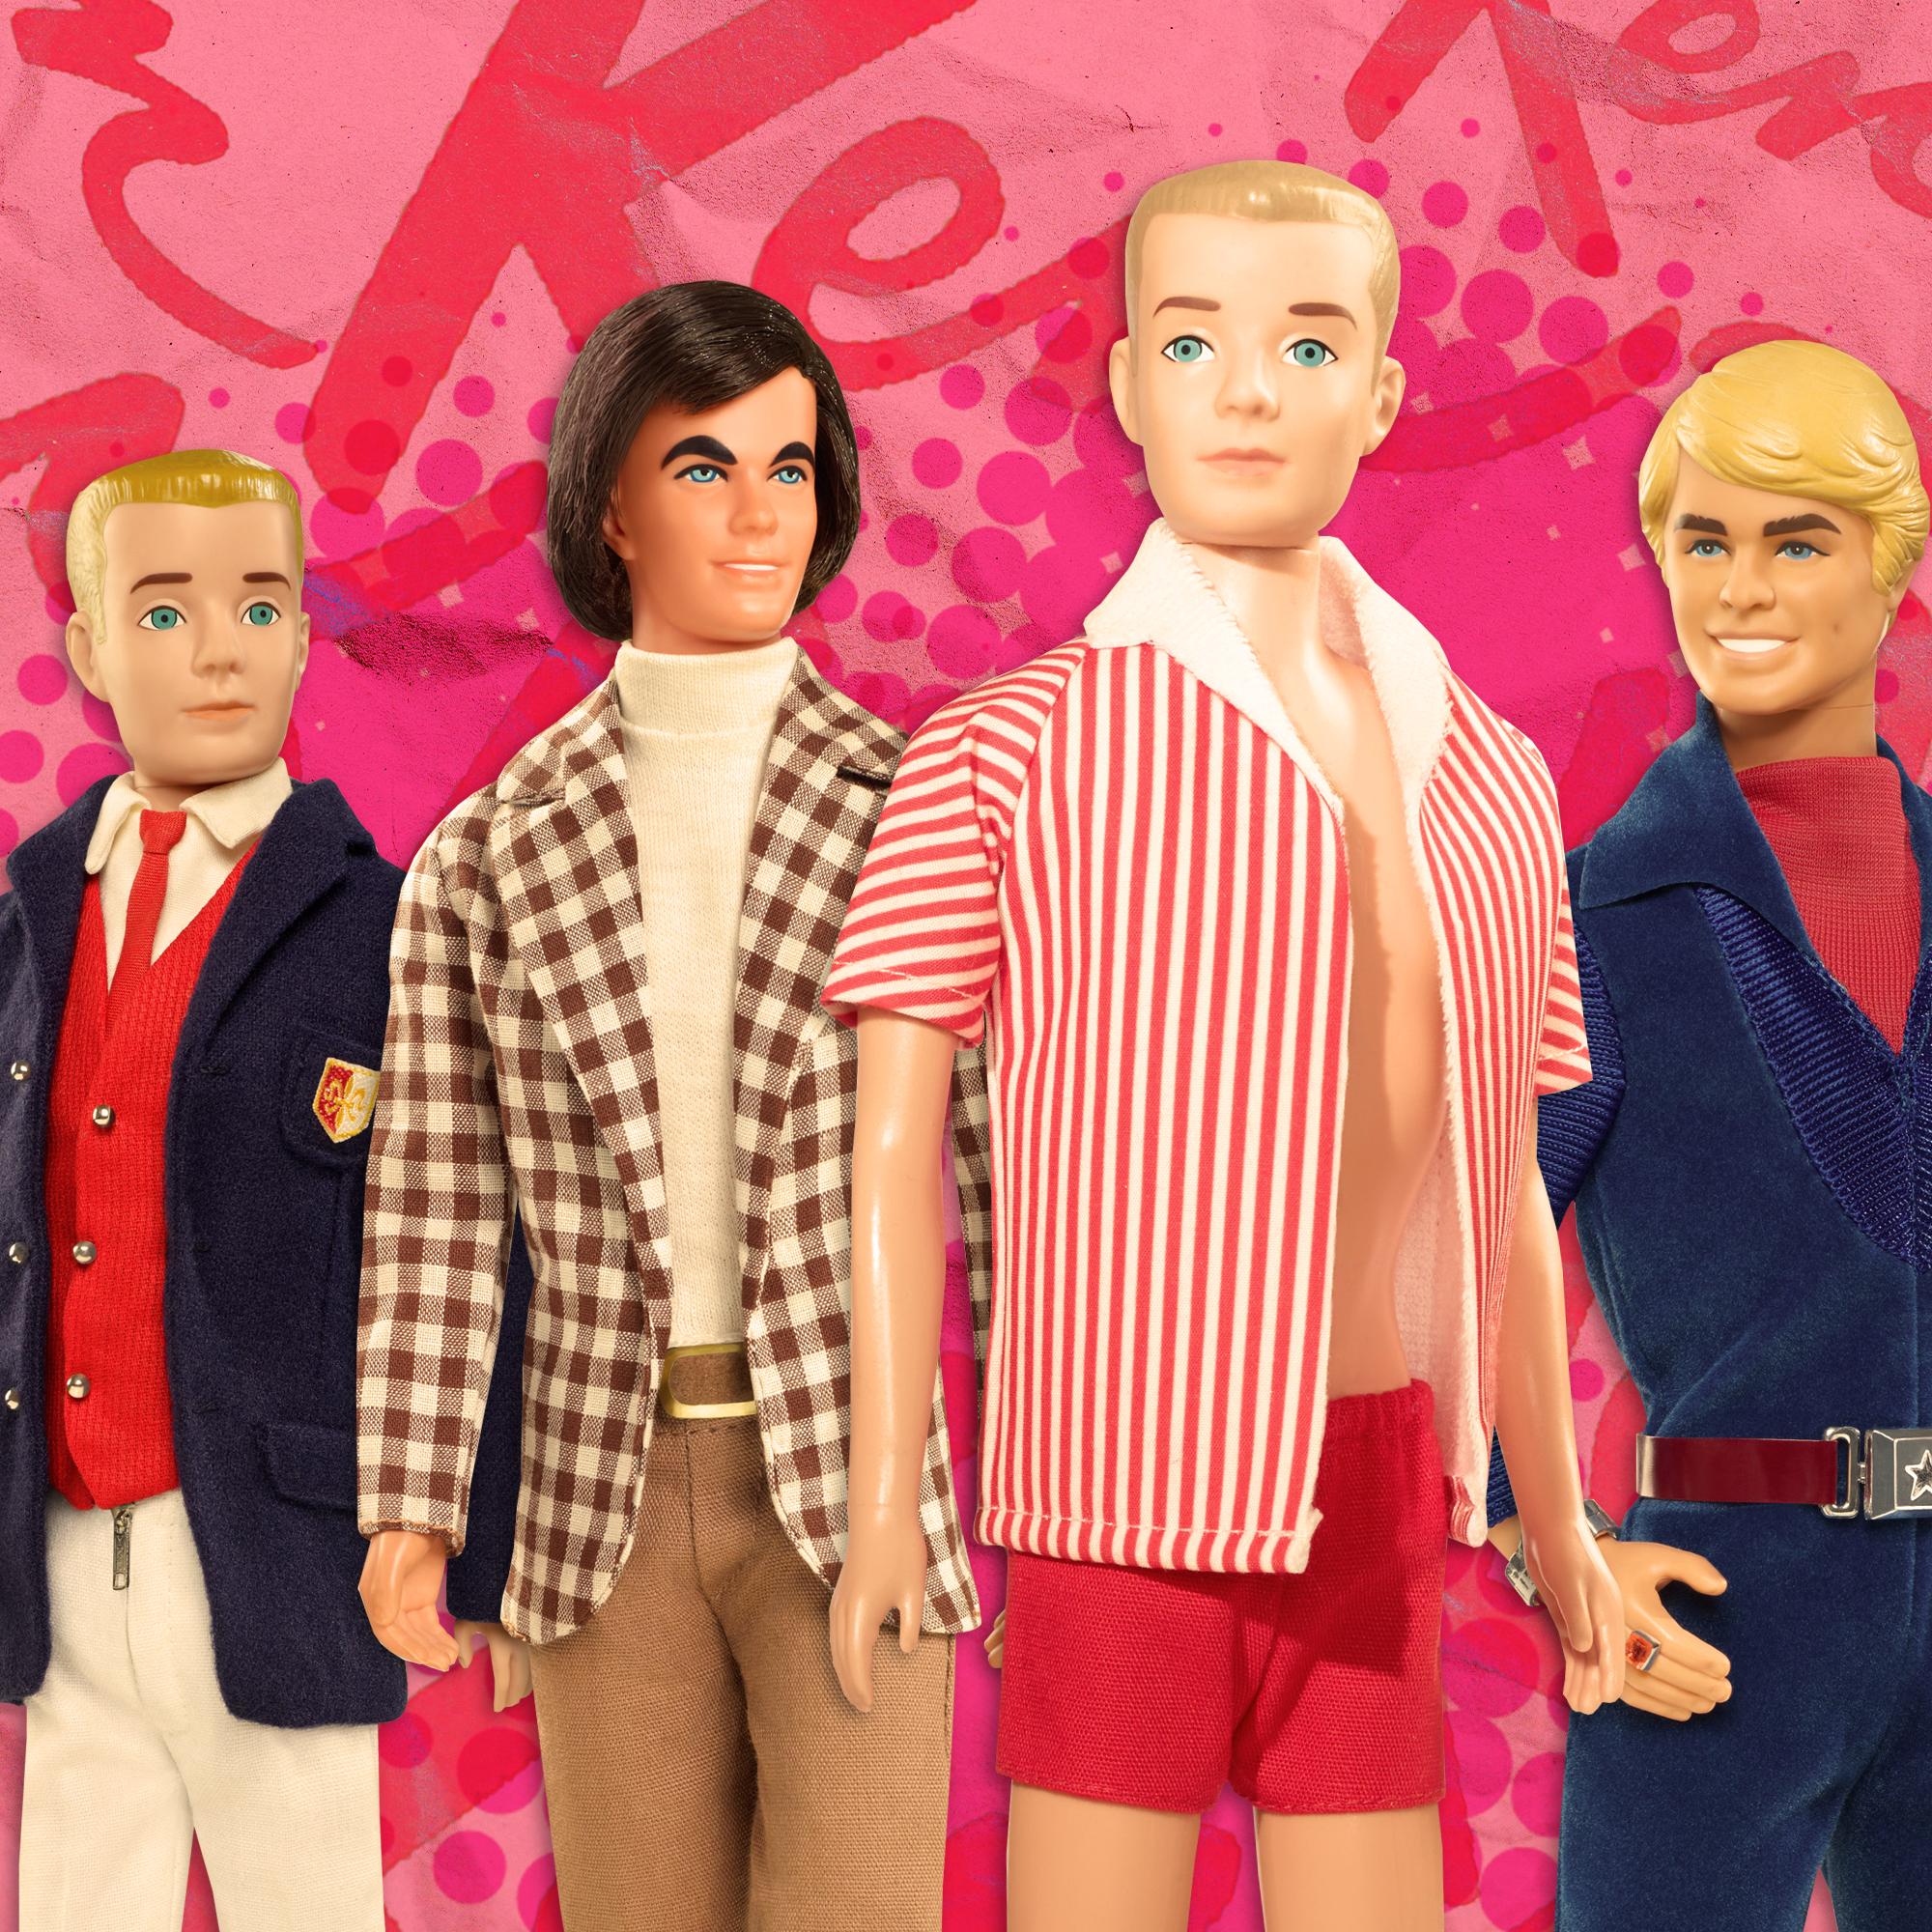 Thumbnail for "He's (Not) Just Ken: The True History of Barbie’s Beau".